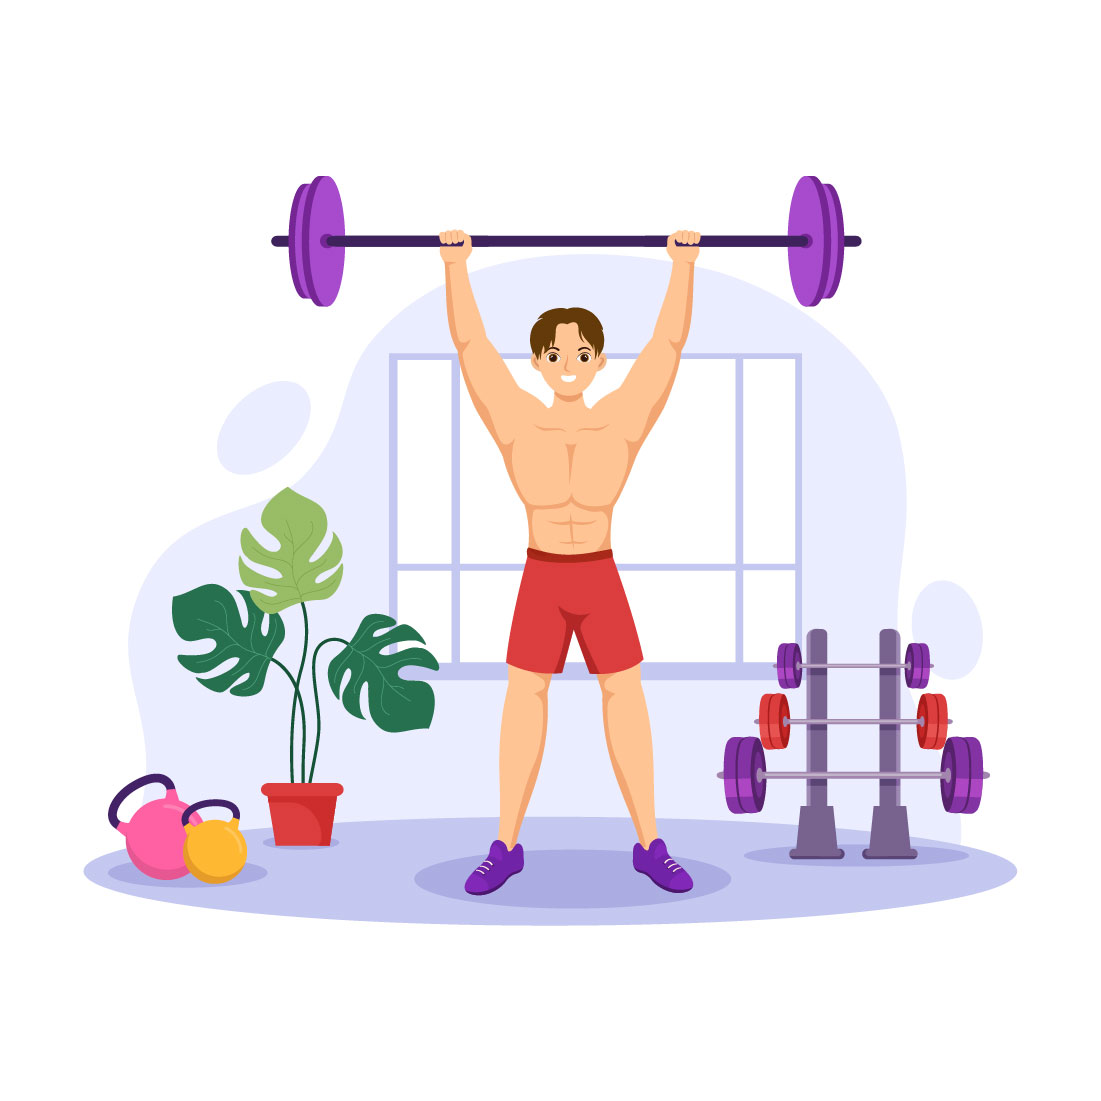 Weightlifting Sport Illustration cover image.